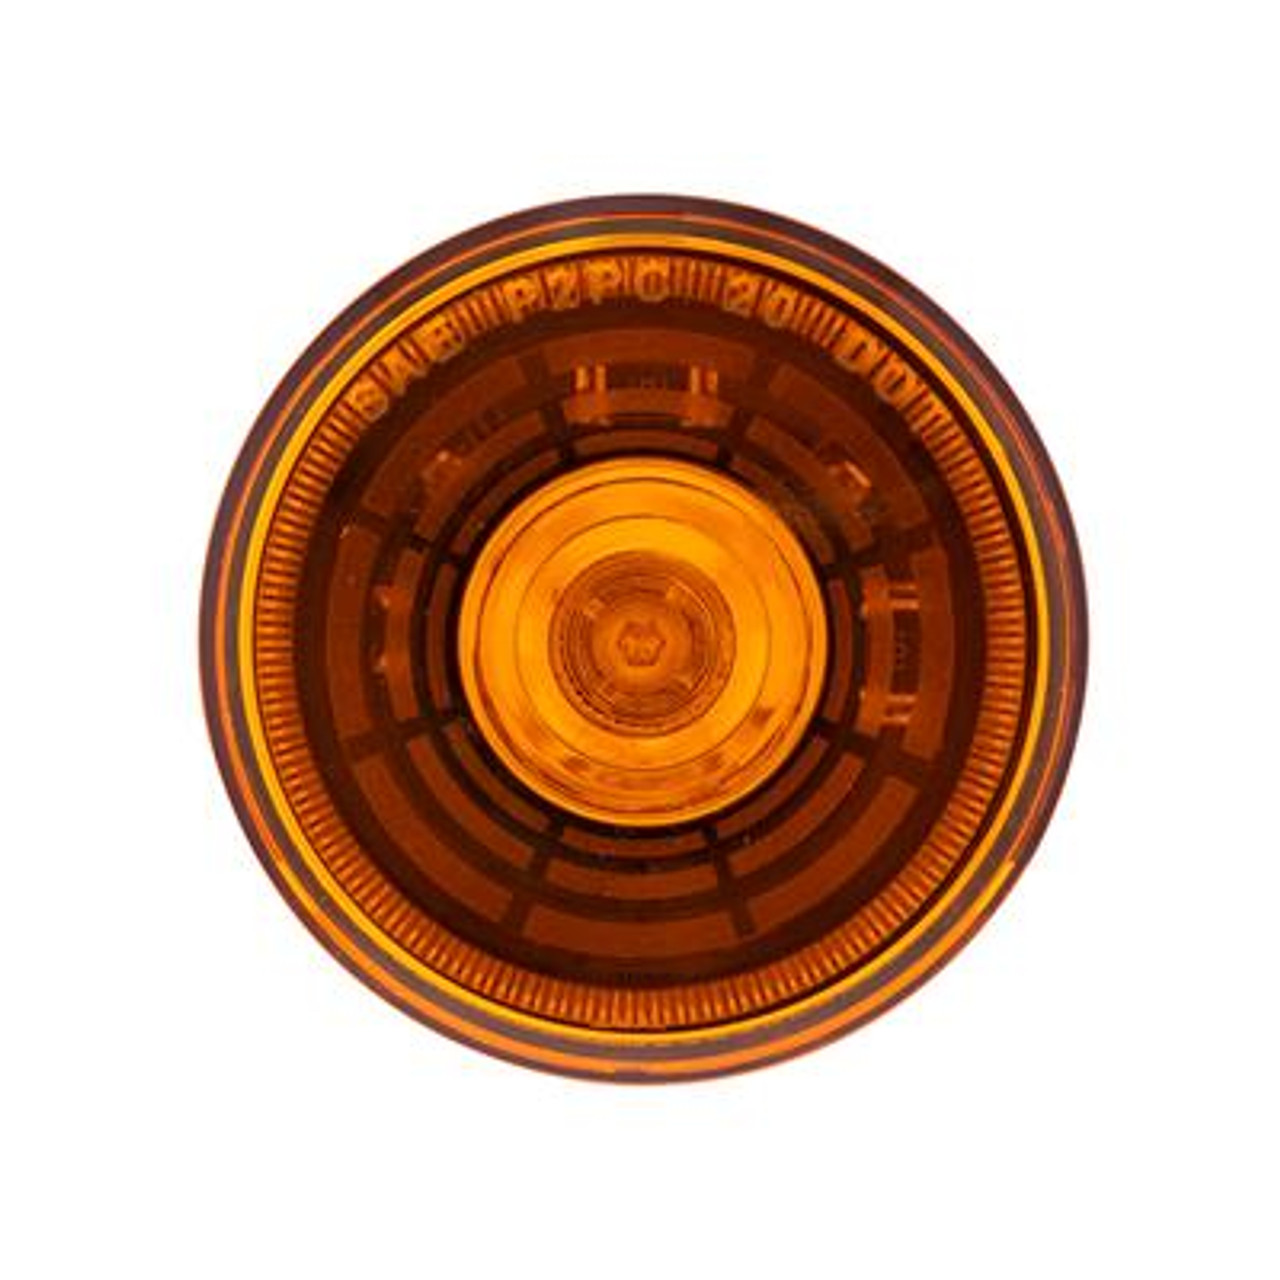 4 LED 2" Round Abyss Light (Clearance/Marker) - Amber LED/Amber Lens